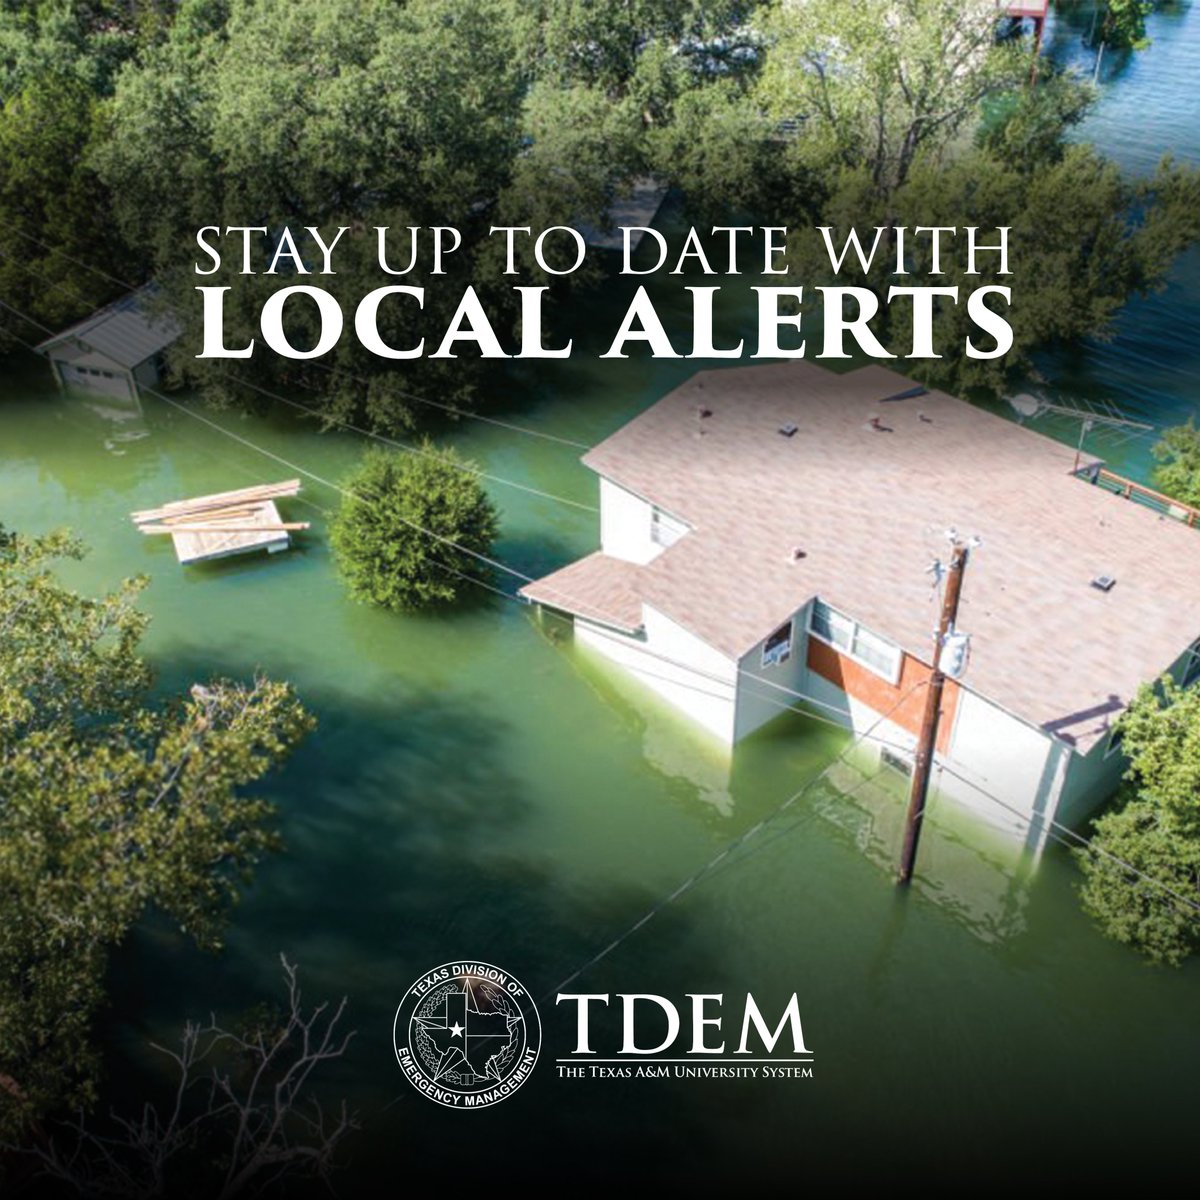 📱Stay Safe with Emergency Alerts📱 Make sure you have multiple ways to receive local emergency alerts on your phone! Stay informed about severe weather, flash floods, and other disasters. ✅Learn more about how to receive messages: ready.gov/alerts